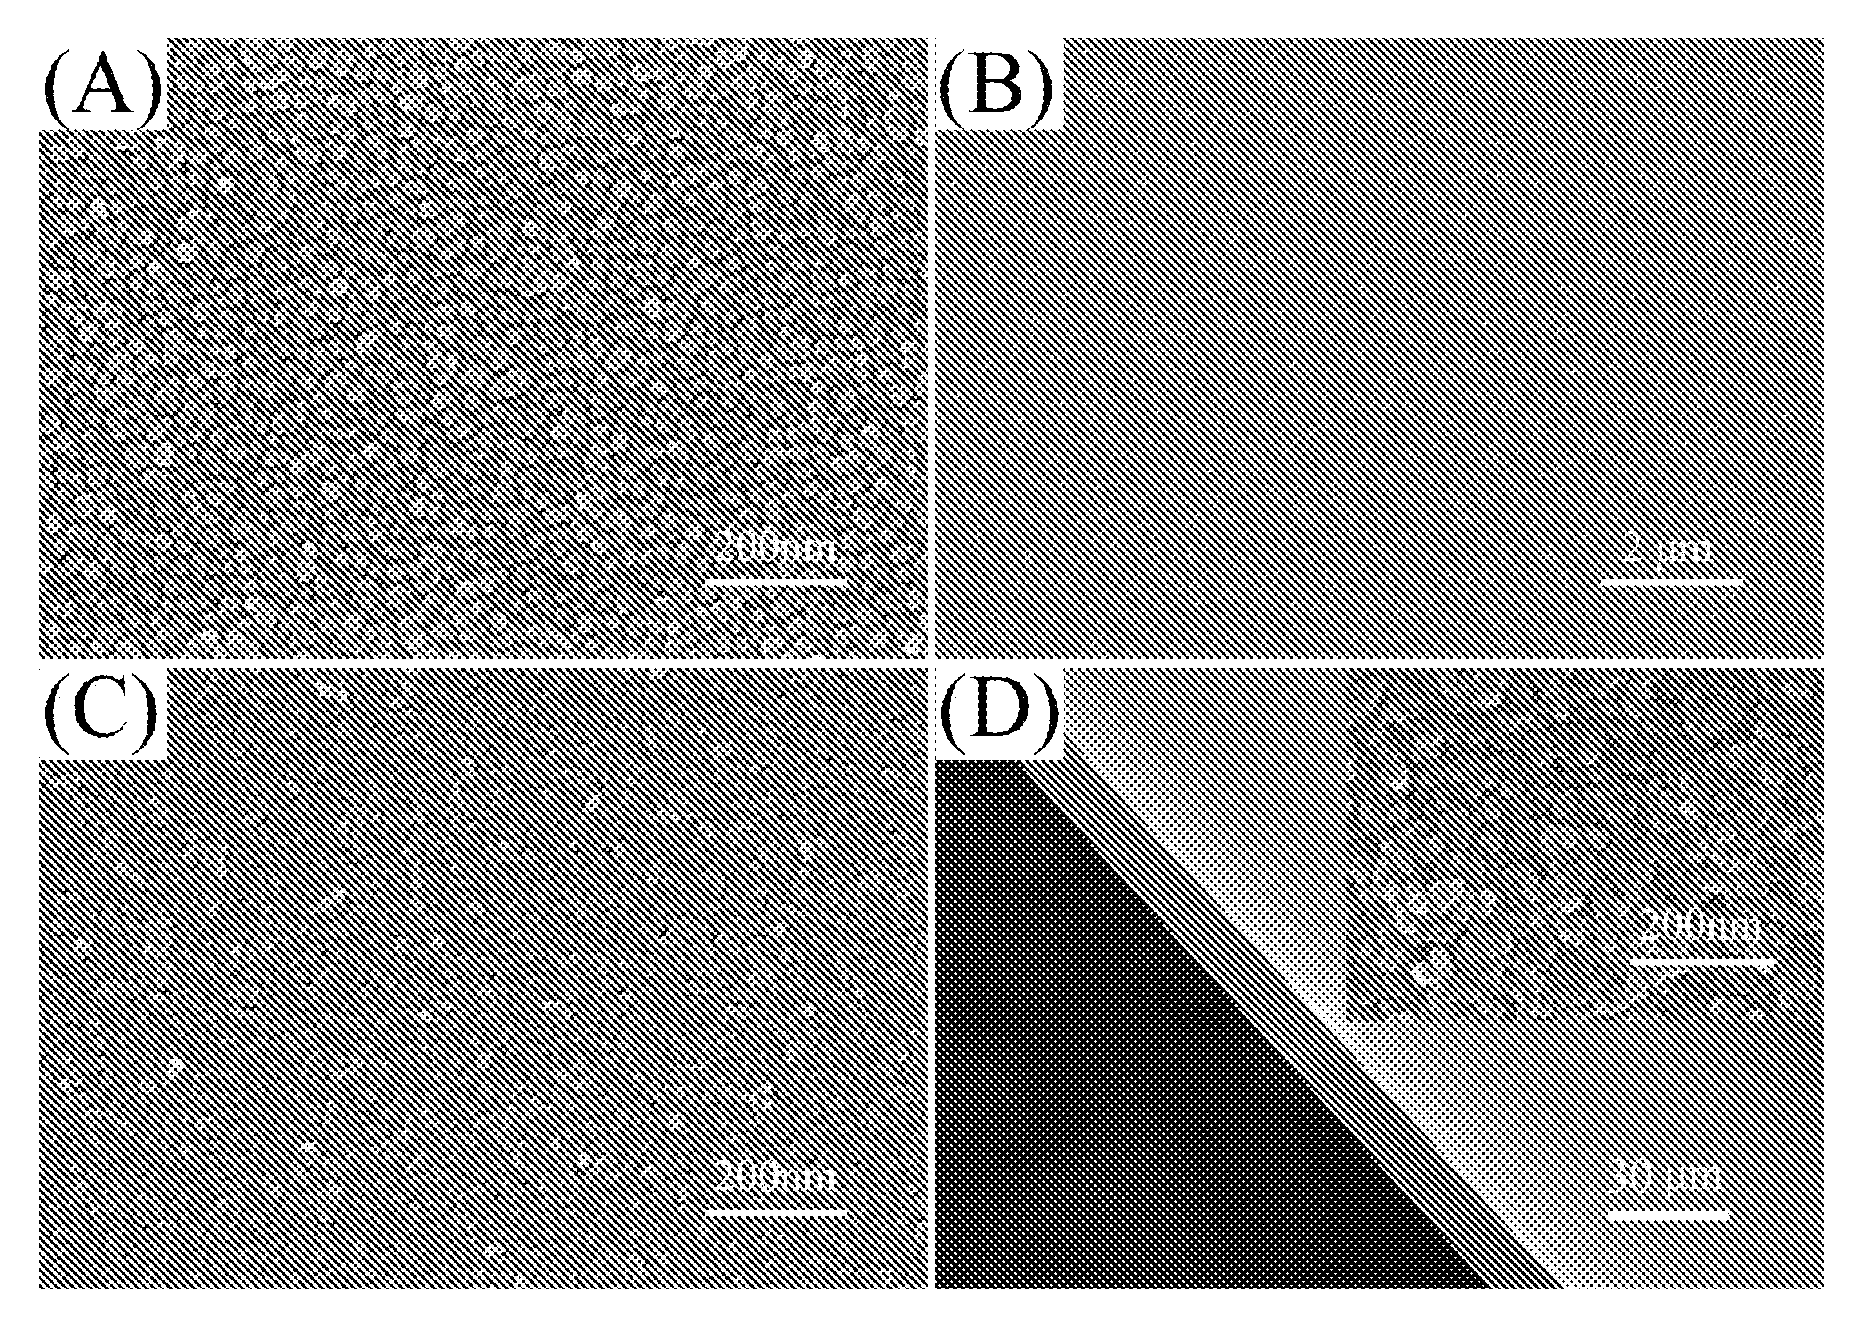 Method for preparing a large continuous oriented nanostructured mixed metal oxide film